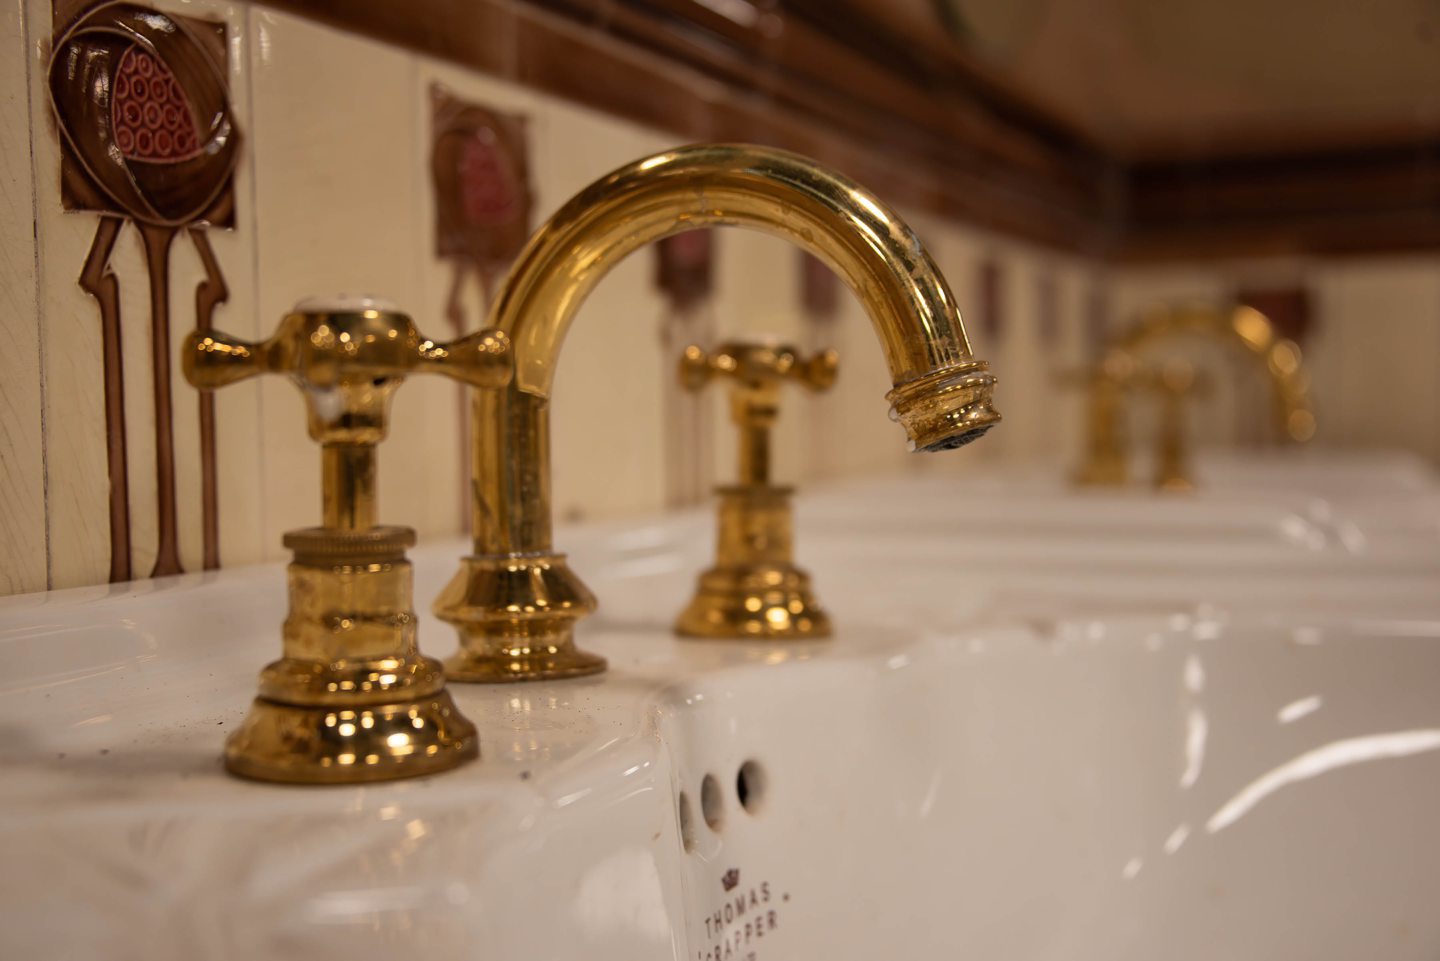 Golden ornate fixtures and fittings in the Victorian toilets